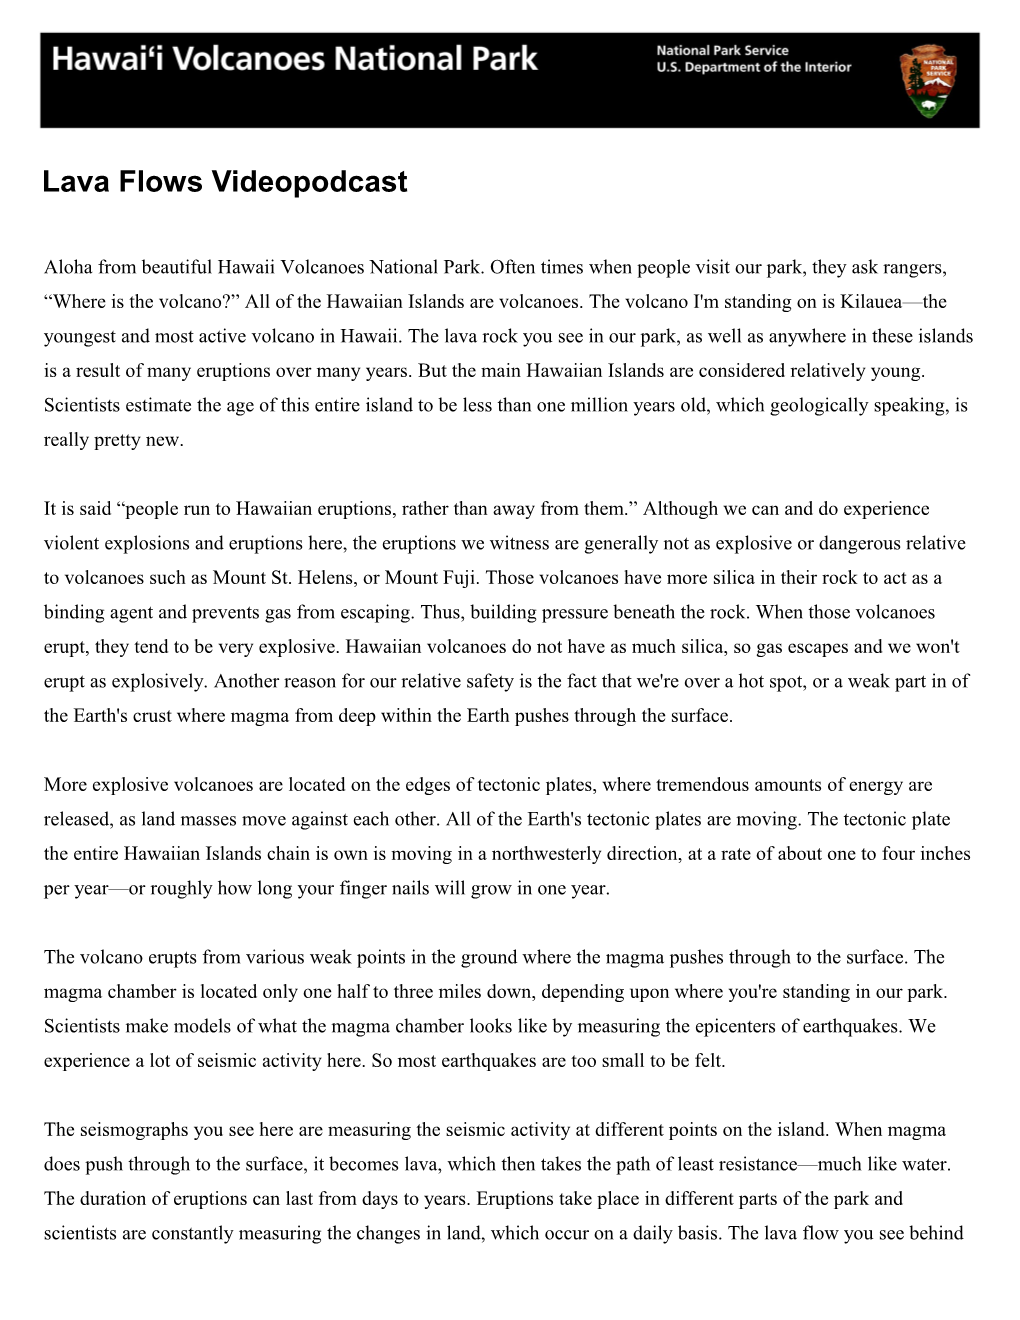 Lava Flows Videopodcast